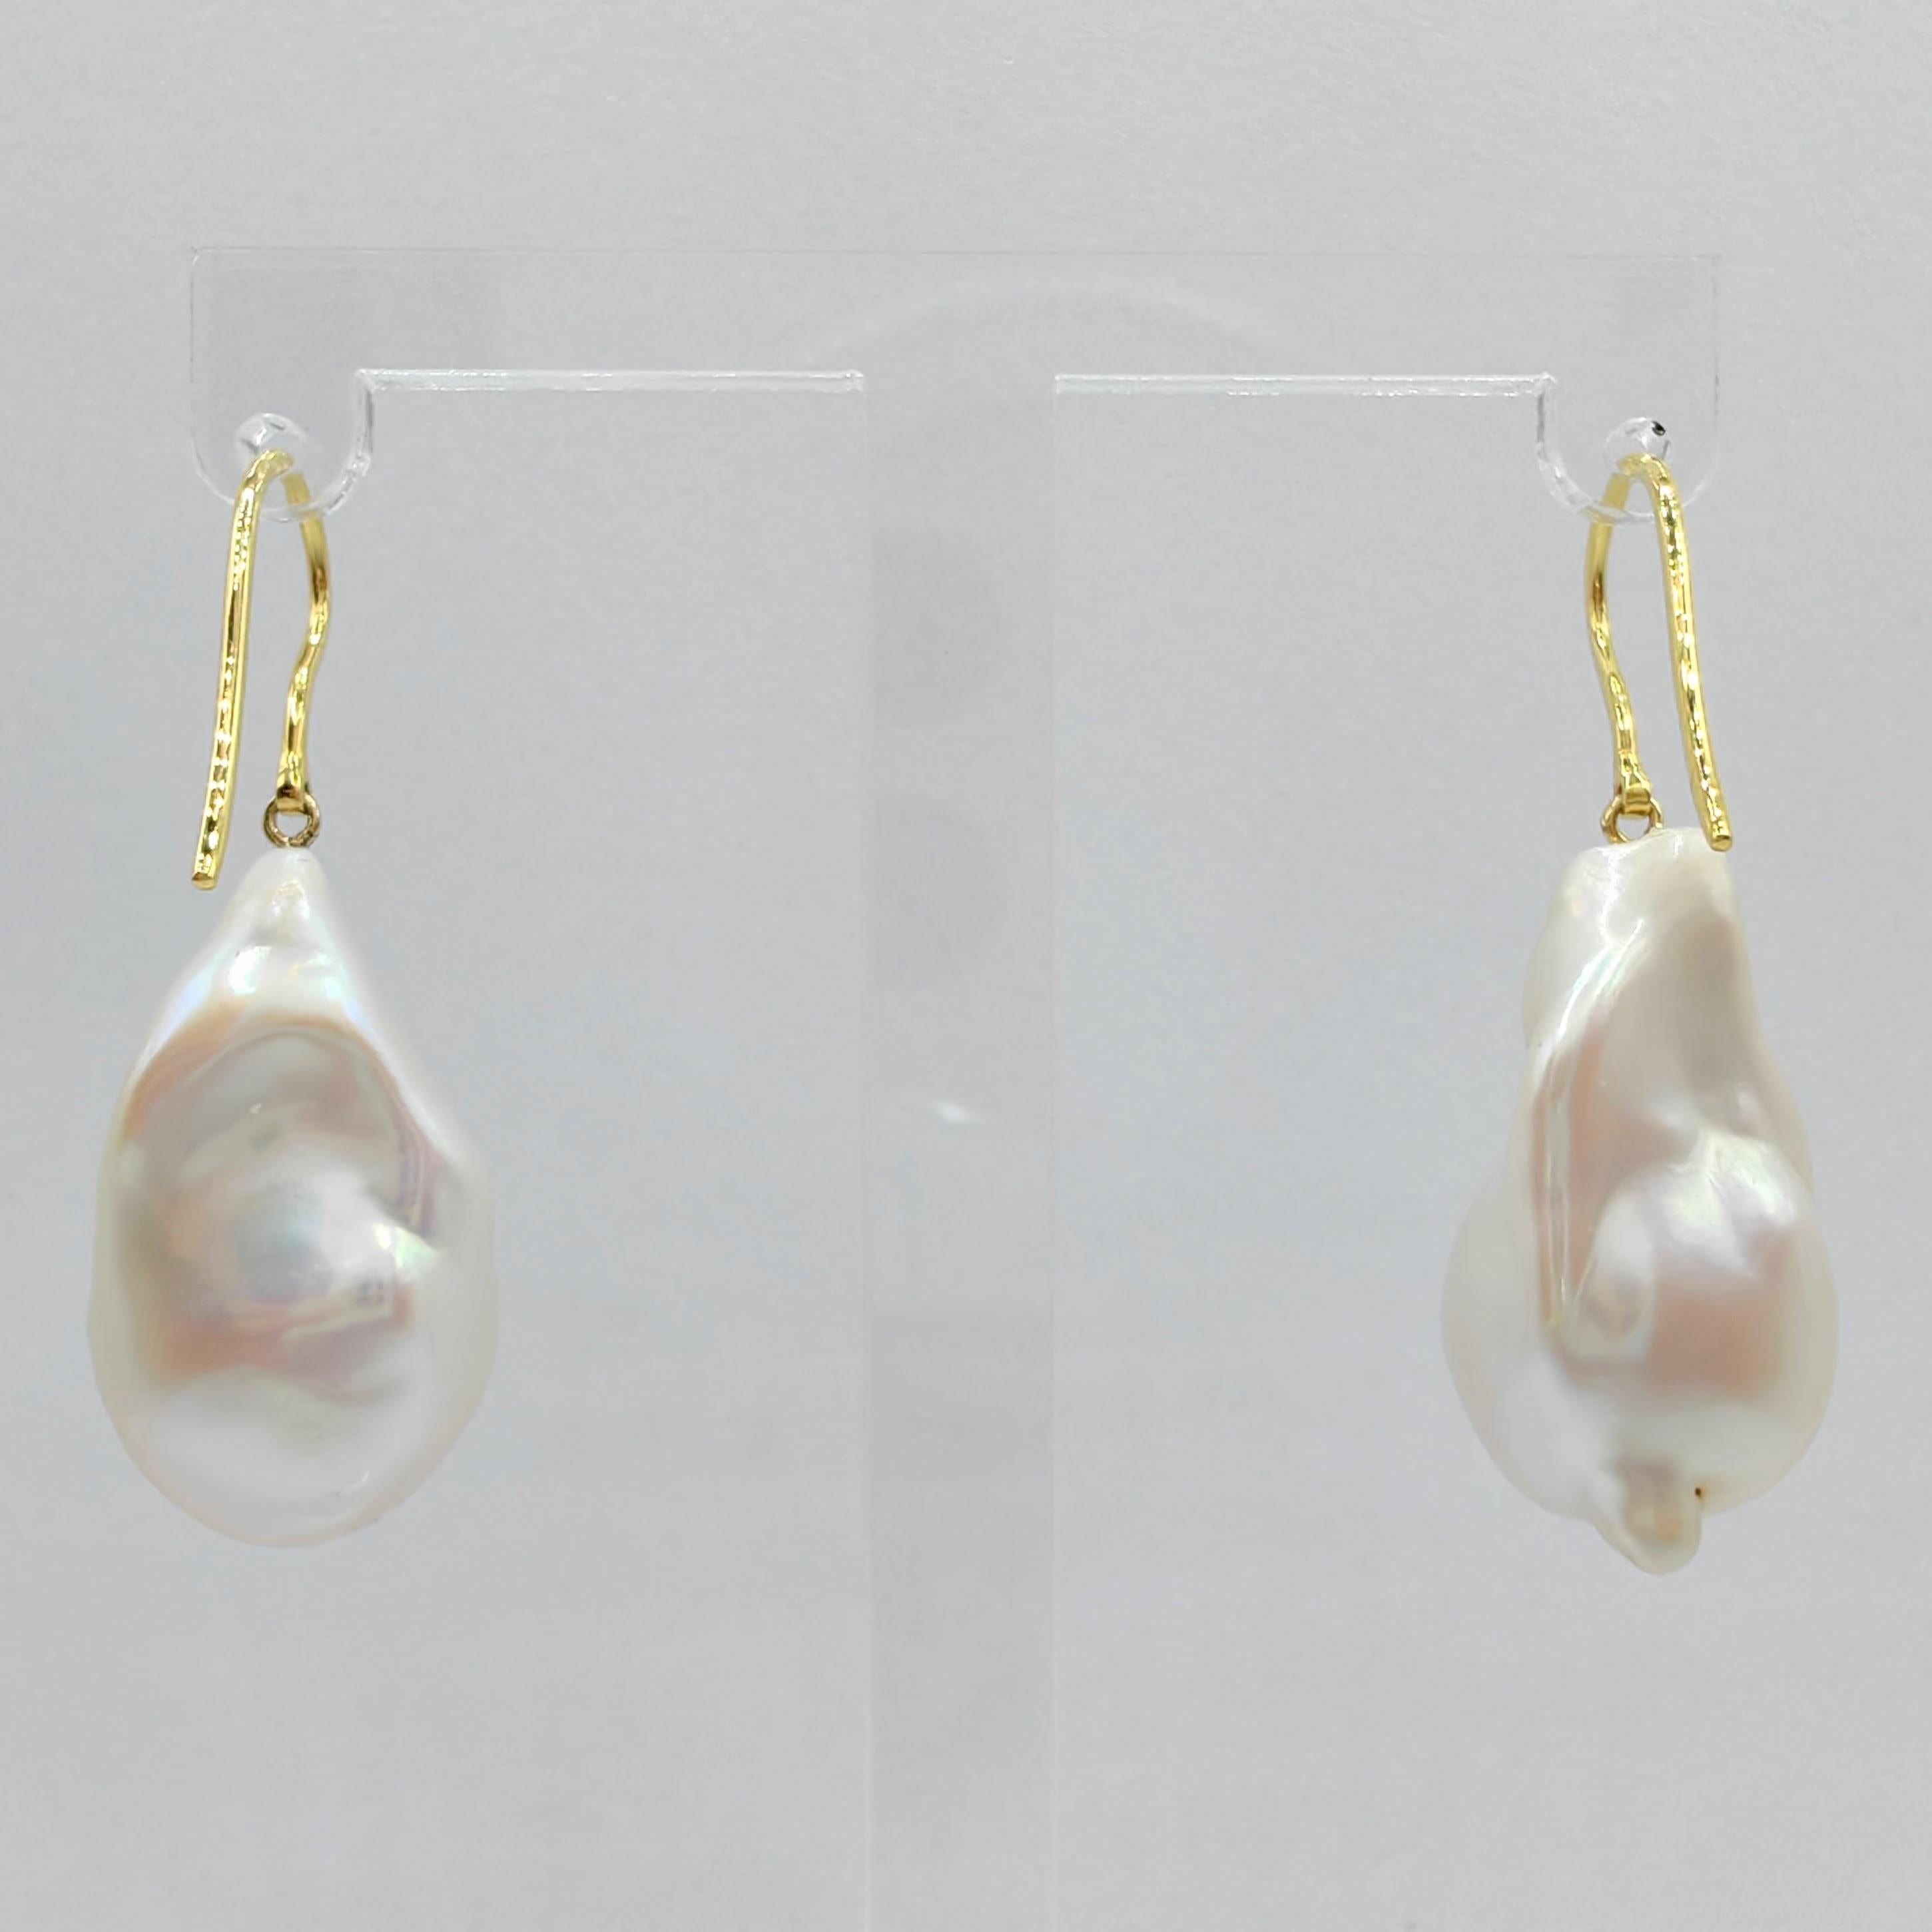 Iridescent Baroque Pearl Drop Earrings With 18K Yellow Gold French Hooks In New Condition For Sale In Wan Chai District, HK